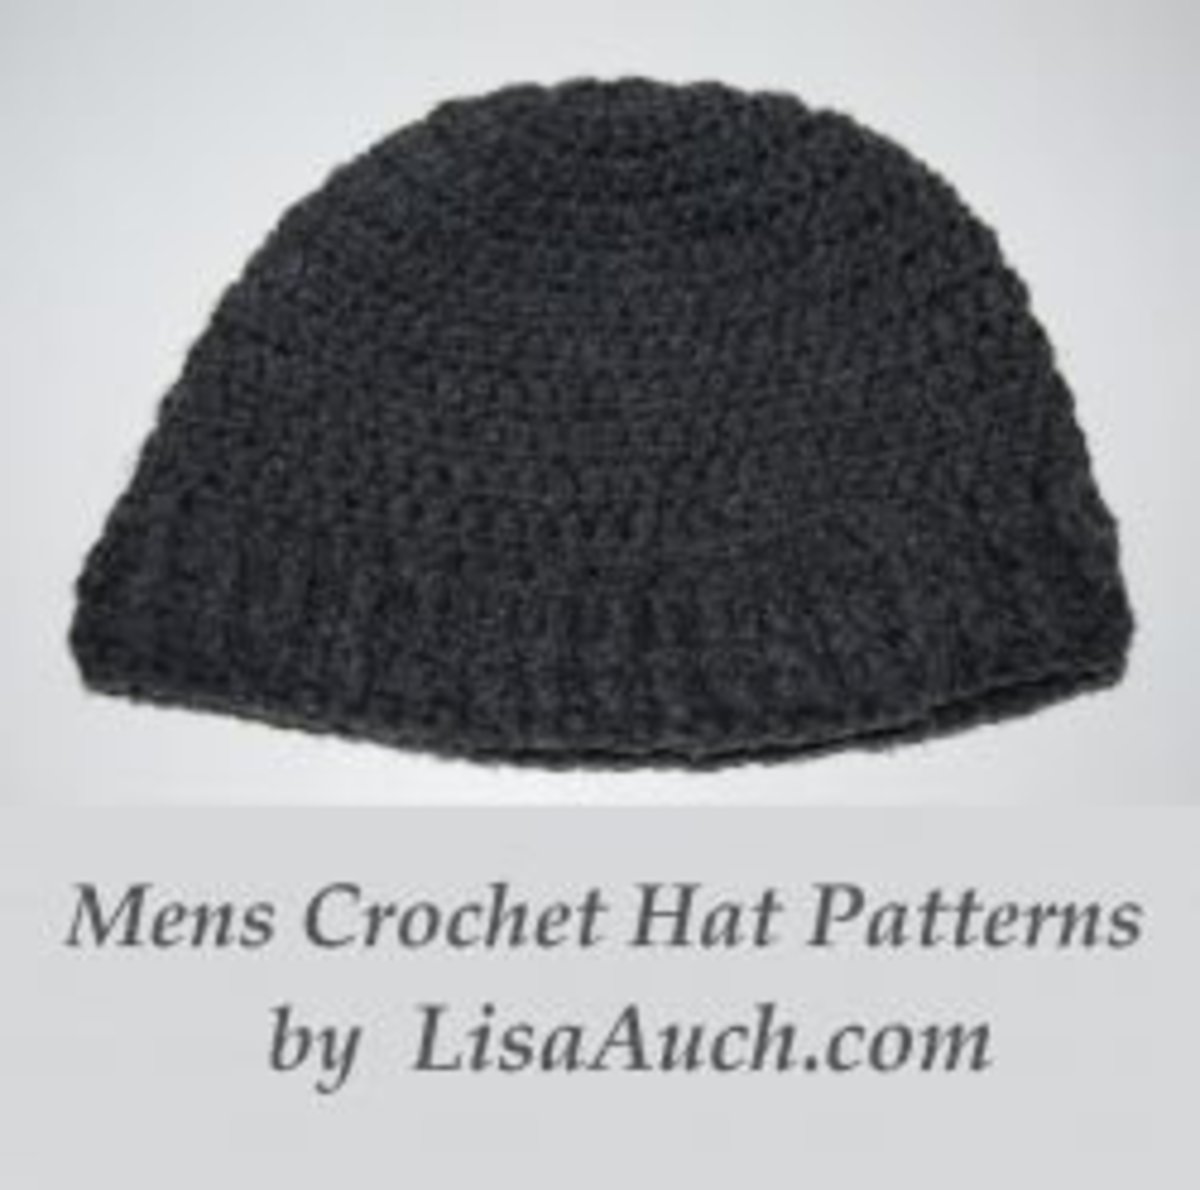 Free Crochet Hat Patterns For Men Hubpages,How Long To Bake Bacon Wrapped Jalapenos